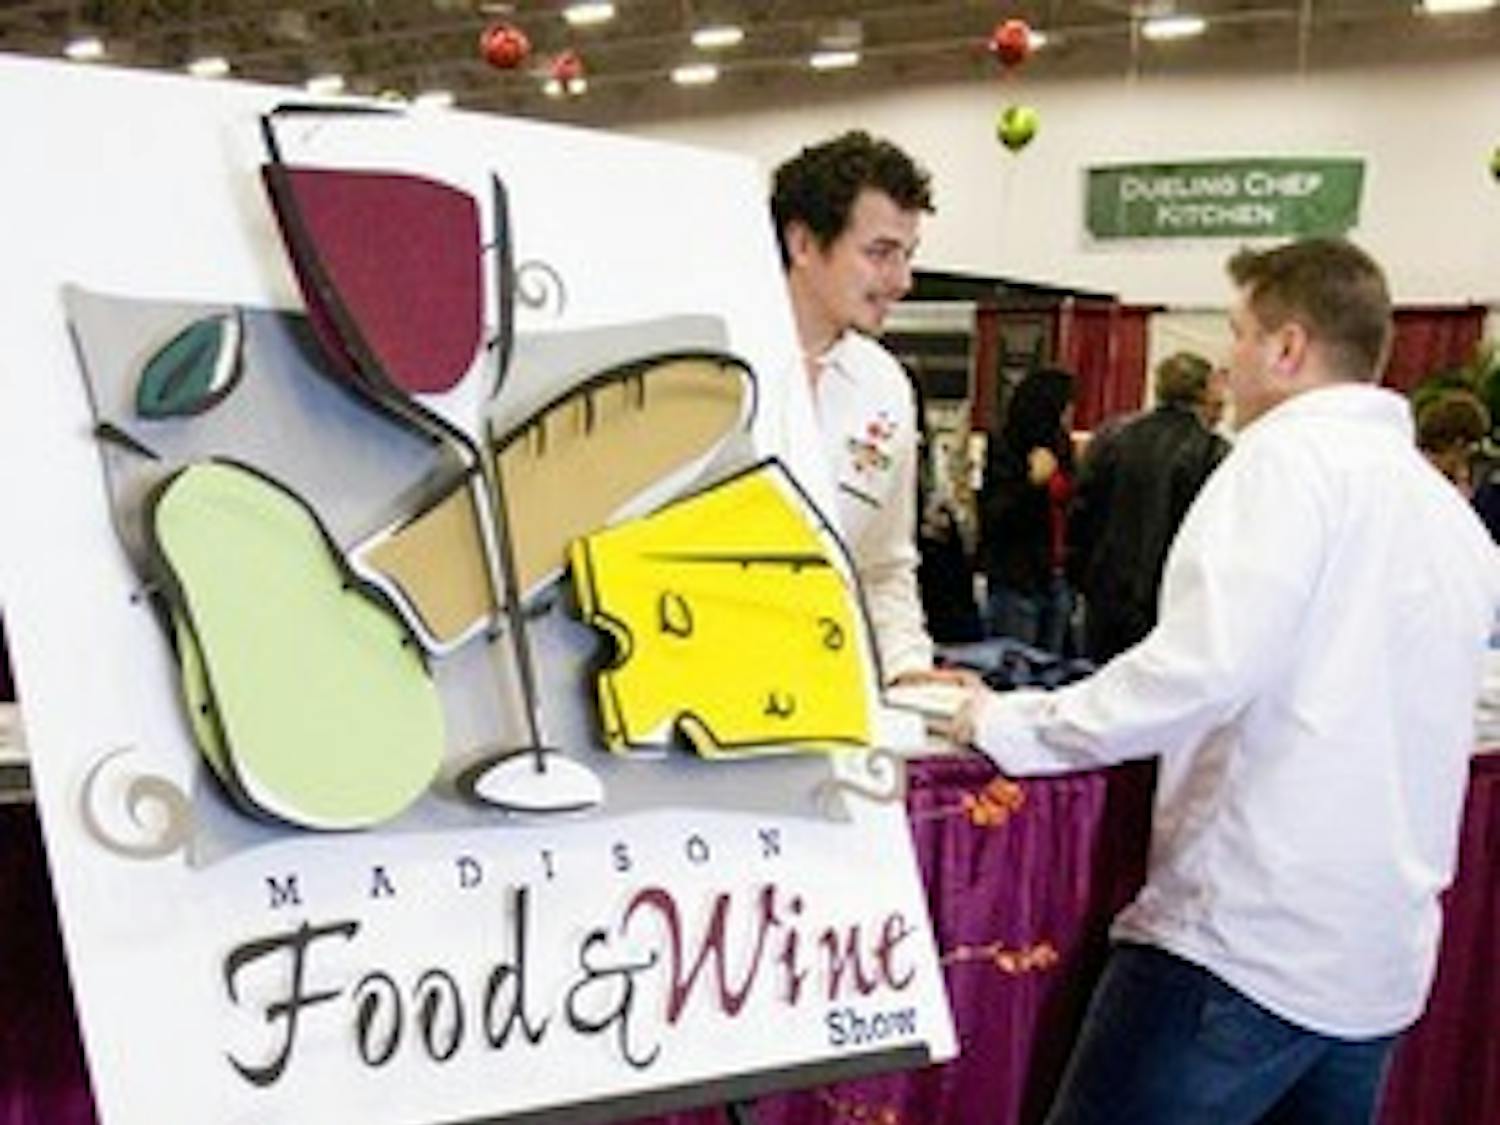 Madison Food and Wine Show worthwhile for new taste of Midwest